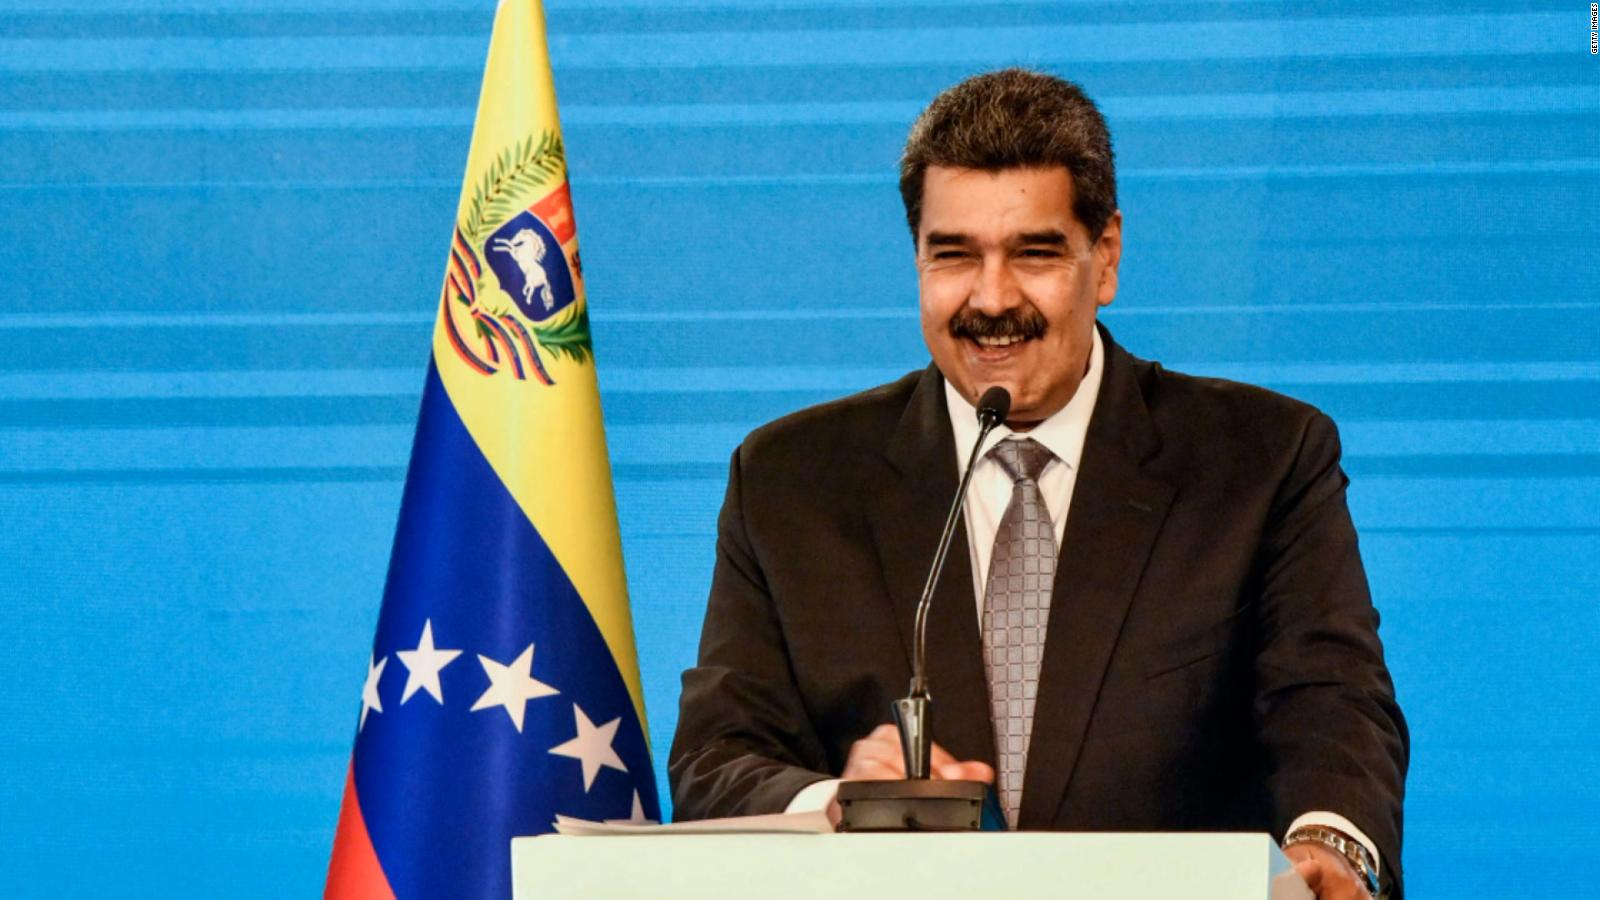 Venezuela strengthens ties with Bahamas, Laos and Saint Kitts and Nevis